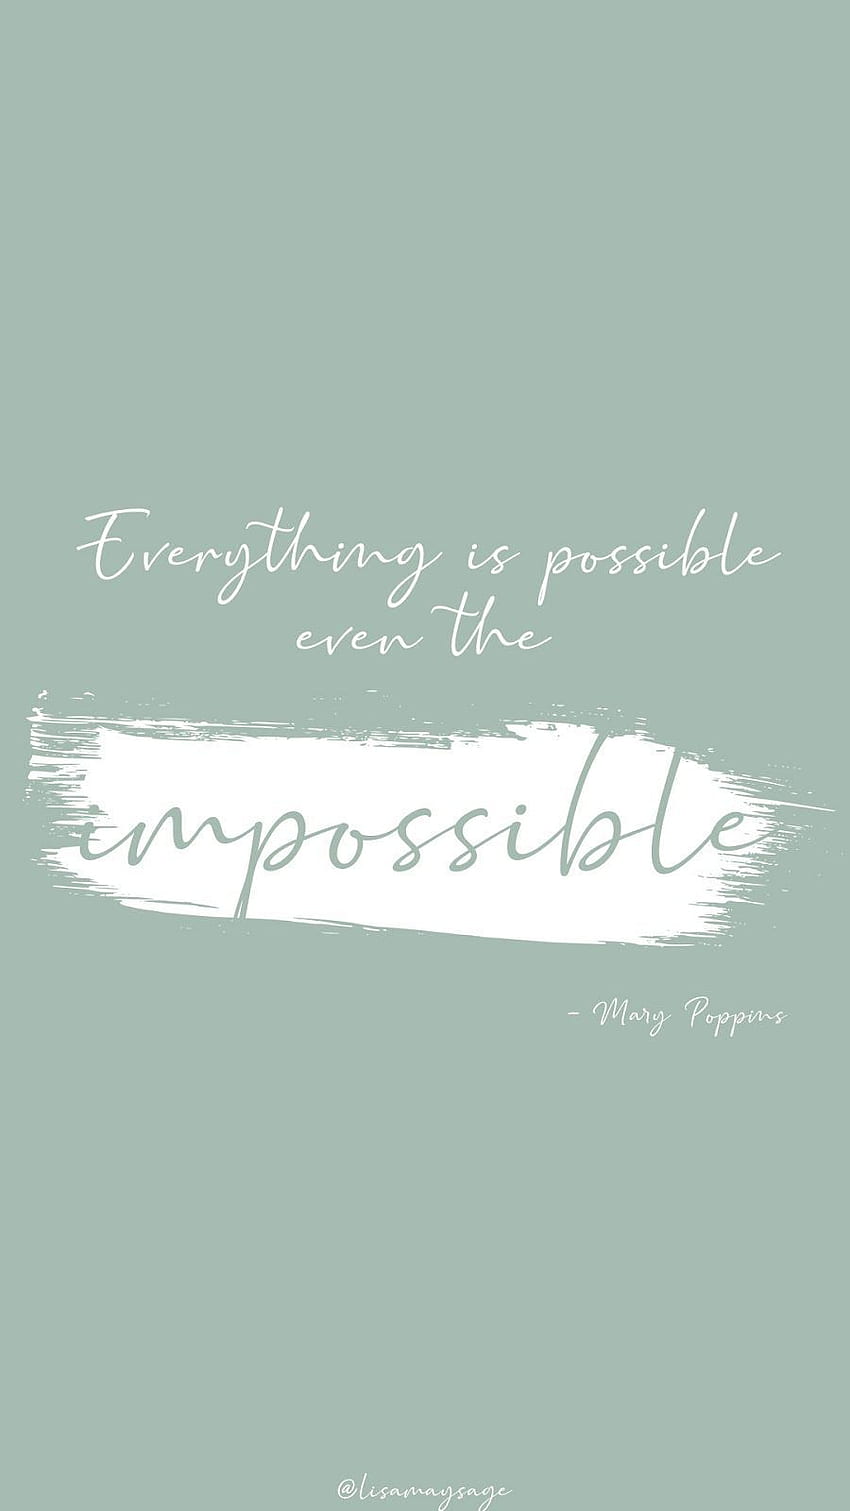 Mary Poppings Quote in 2020. Disney quote , Disney phone , Disney quote iphone, Mary Poppins HD phone wallpaper